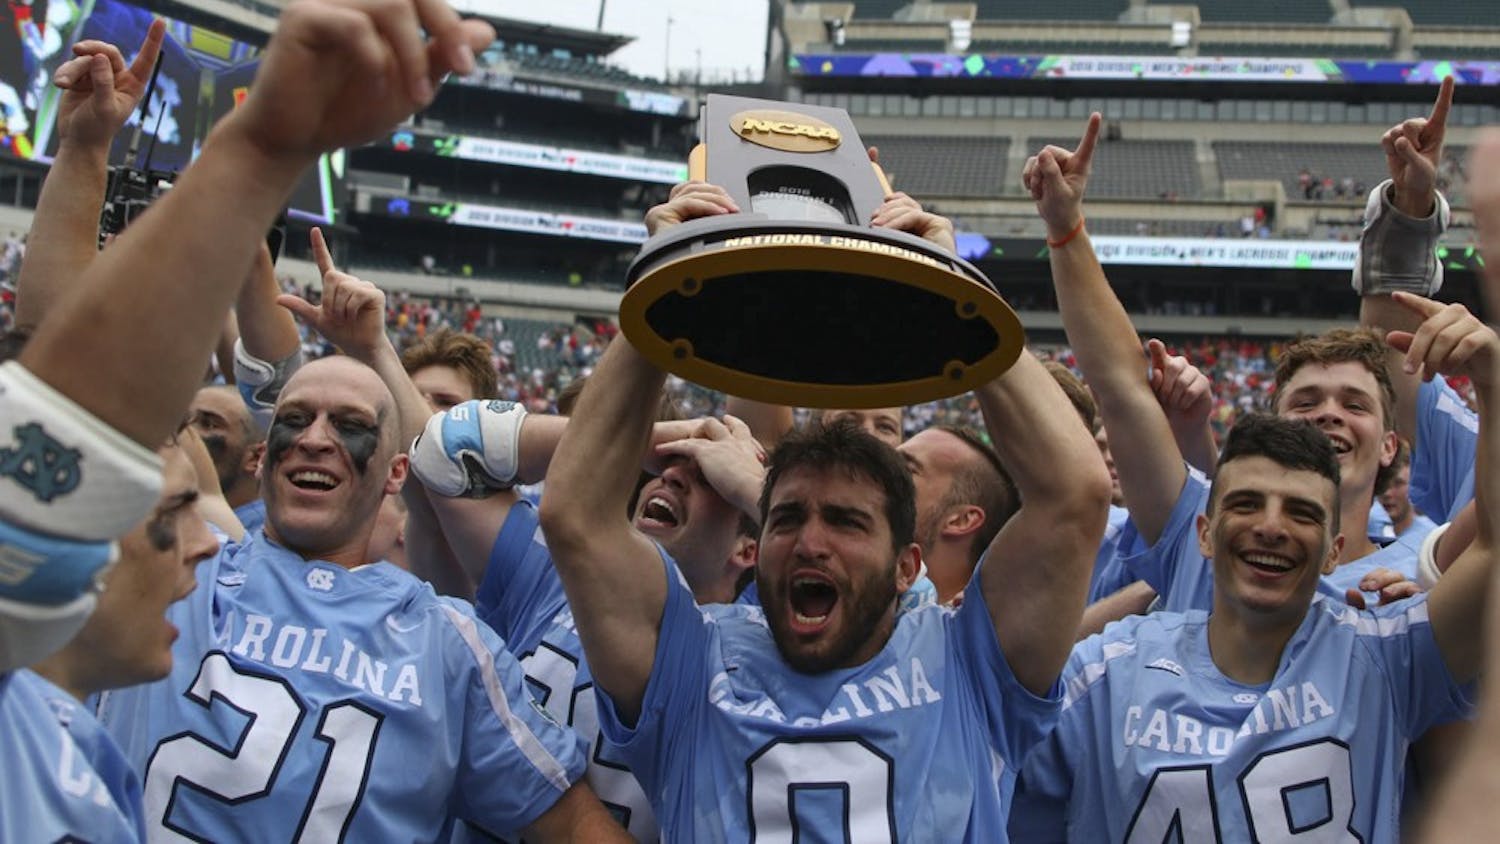 The UNC Men's Lacrosse team defeated top seeded&nbsp;Maryland 14-13 in overtime thanks to a goal&nbsp;from&nbsp;Chris Cloutier in Philadelphia on May 30.